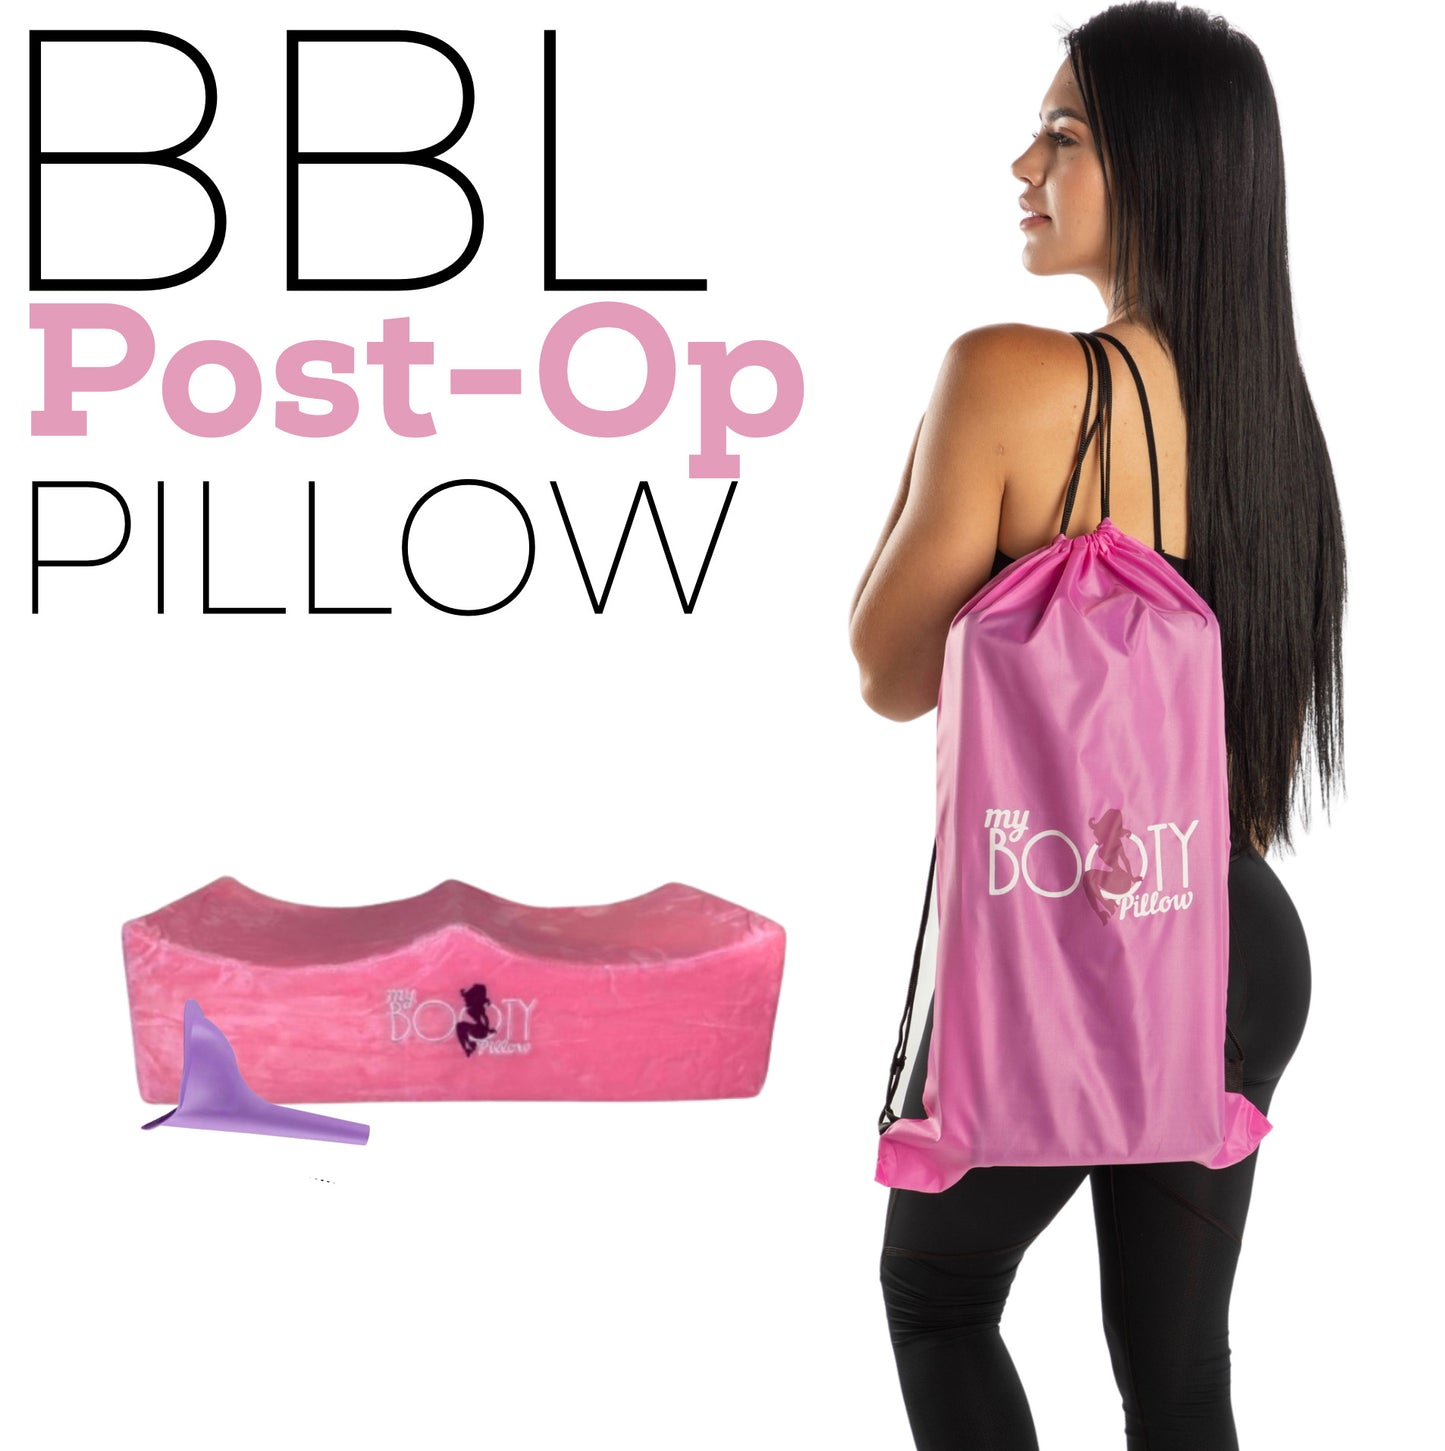 My Booty Pink Pillow